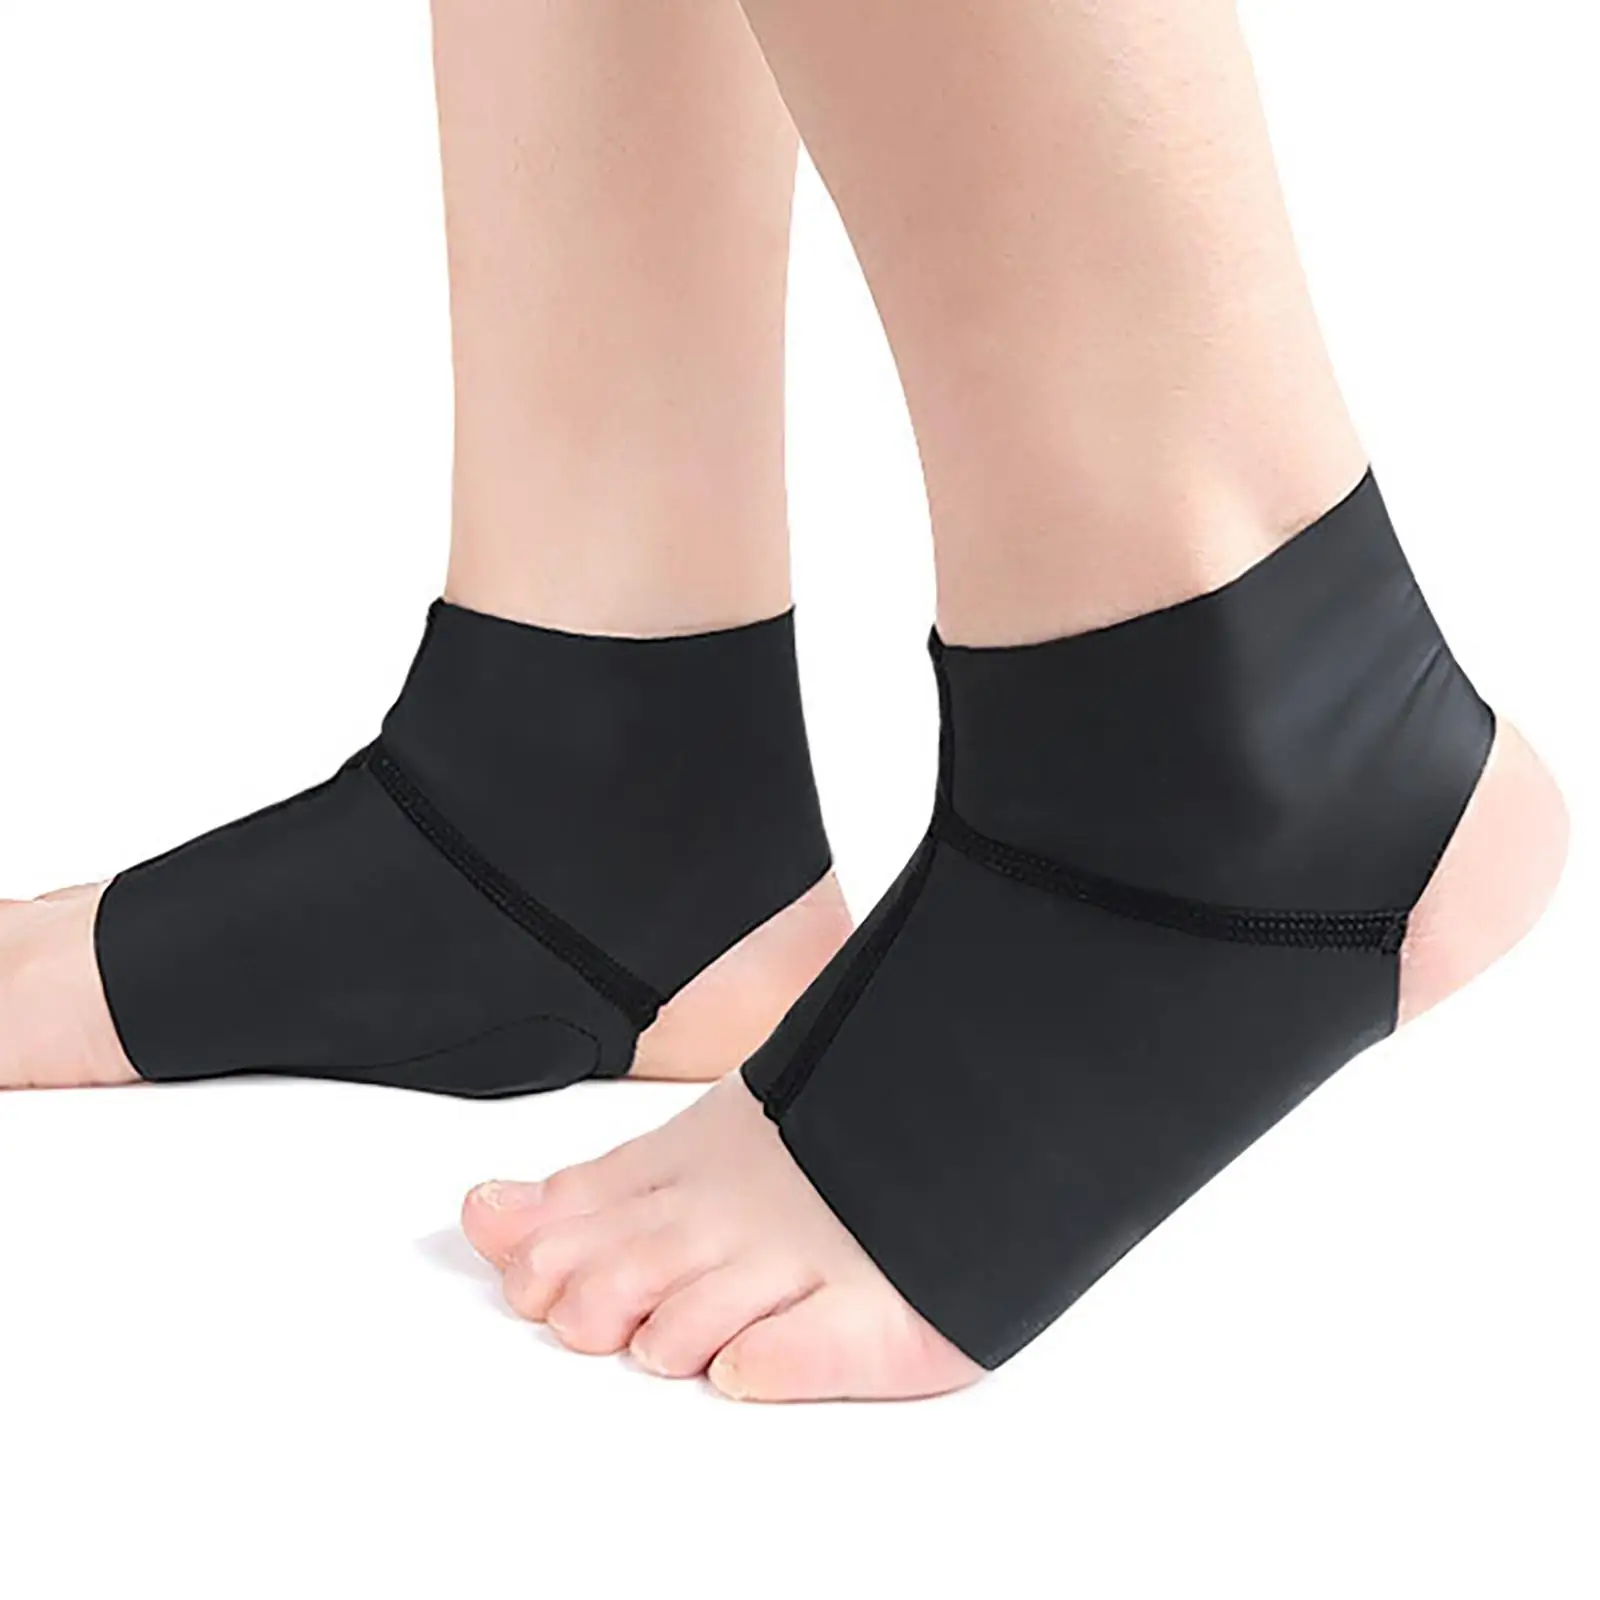 2x Arch Support Foot Pad Breathable Orthopedic Comfortable 2-In-1 Ankle Compression Brace Corrector for Running Sports Flat Feet